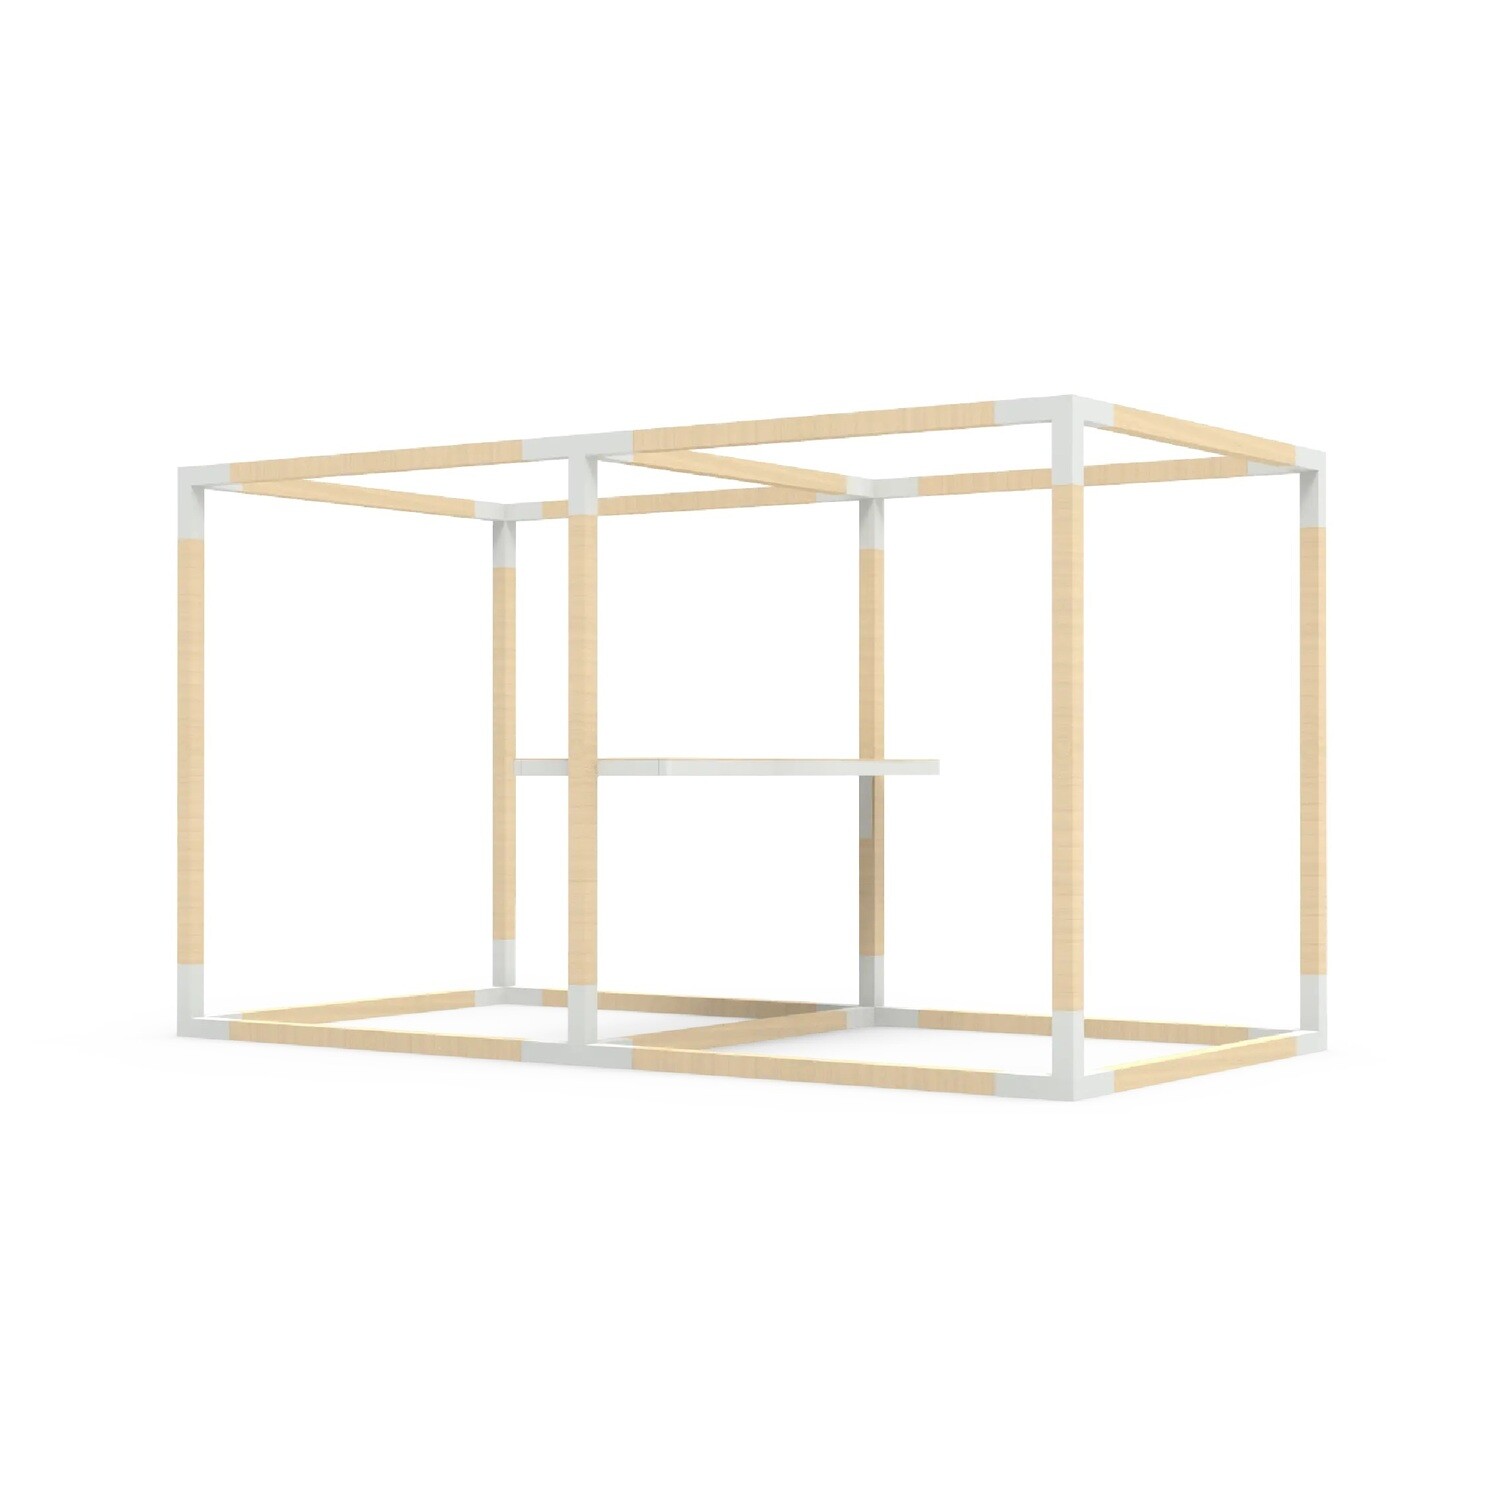 BAR TABLE FOR TWO CUBES  - Modular System LEVA (ACCESSORY)